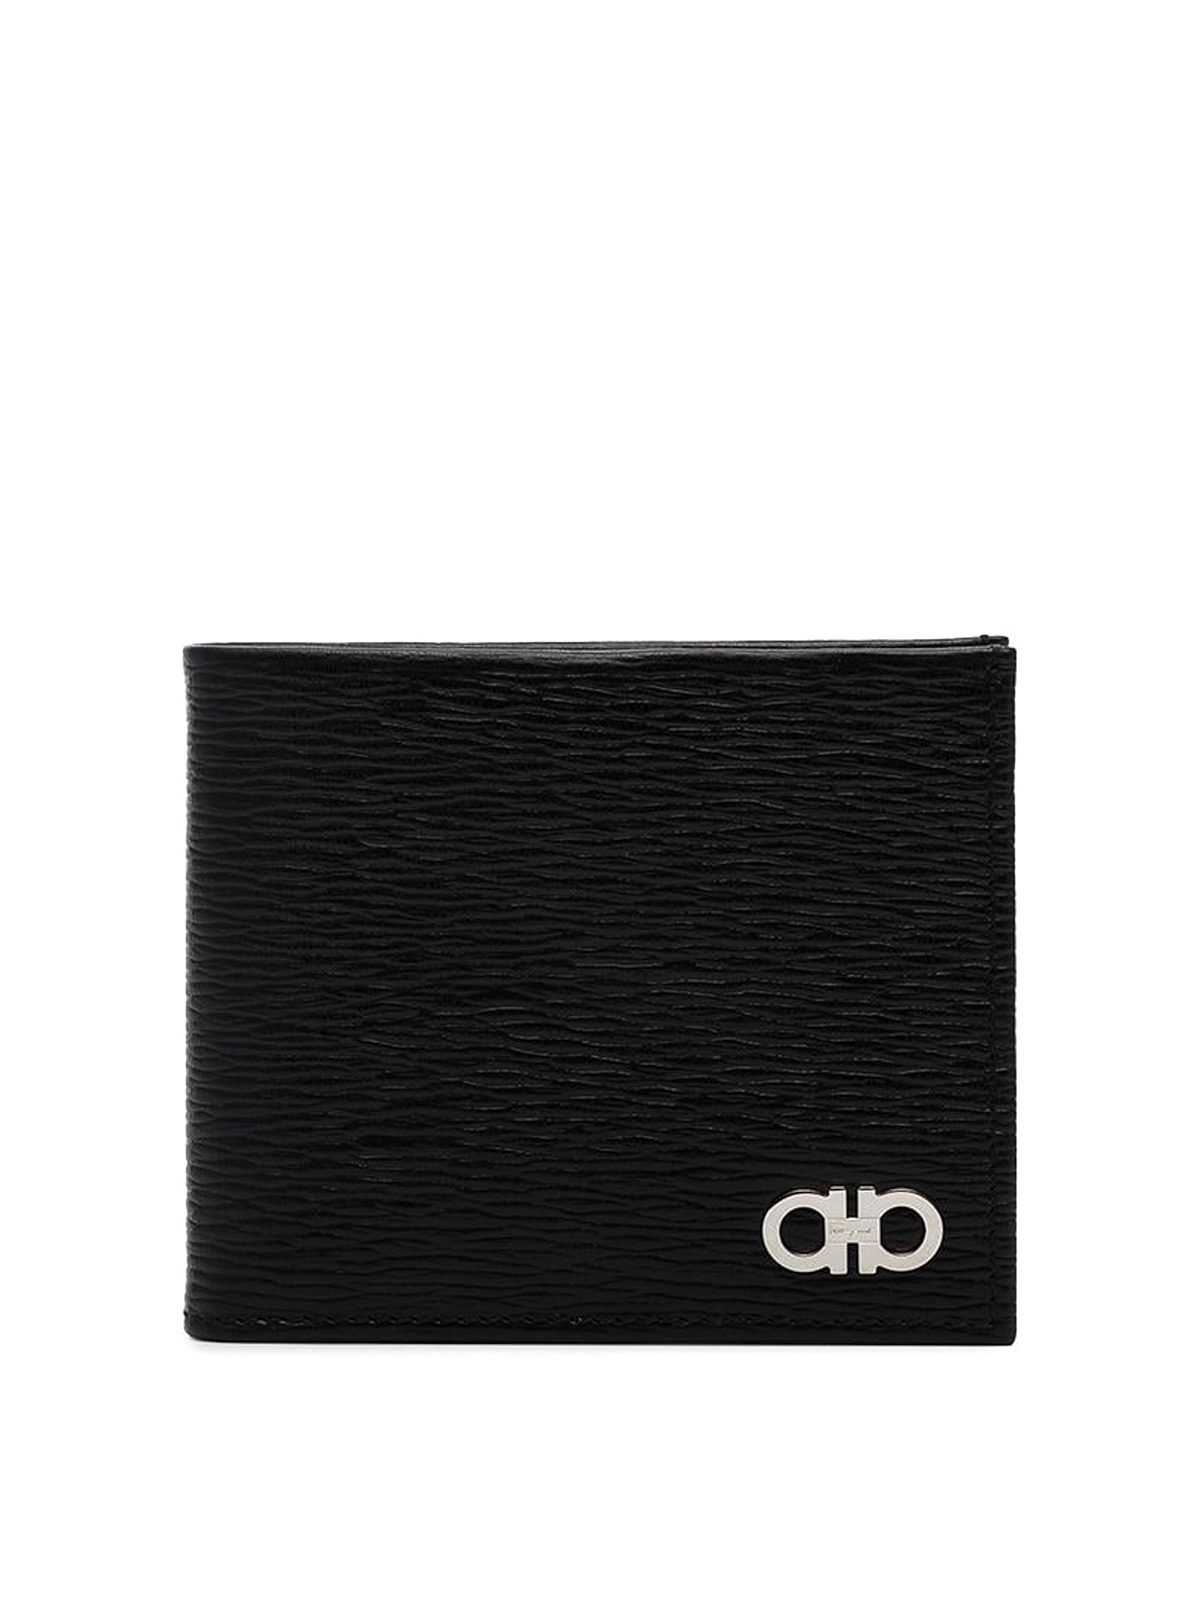 Ferragamo Textured Leather Wallet With Logo In Black